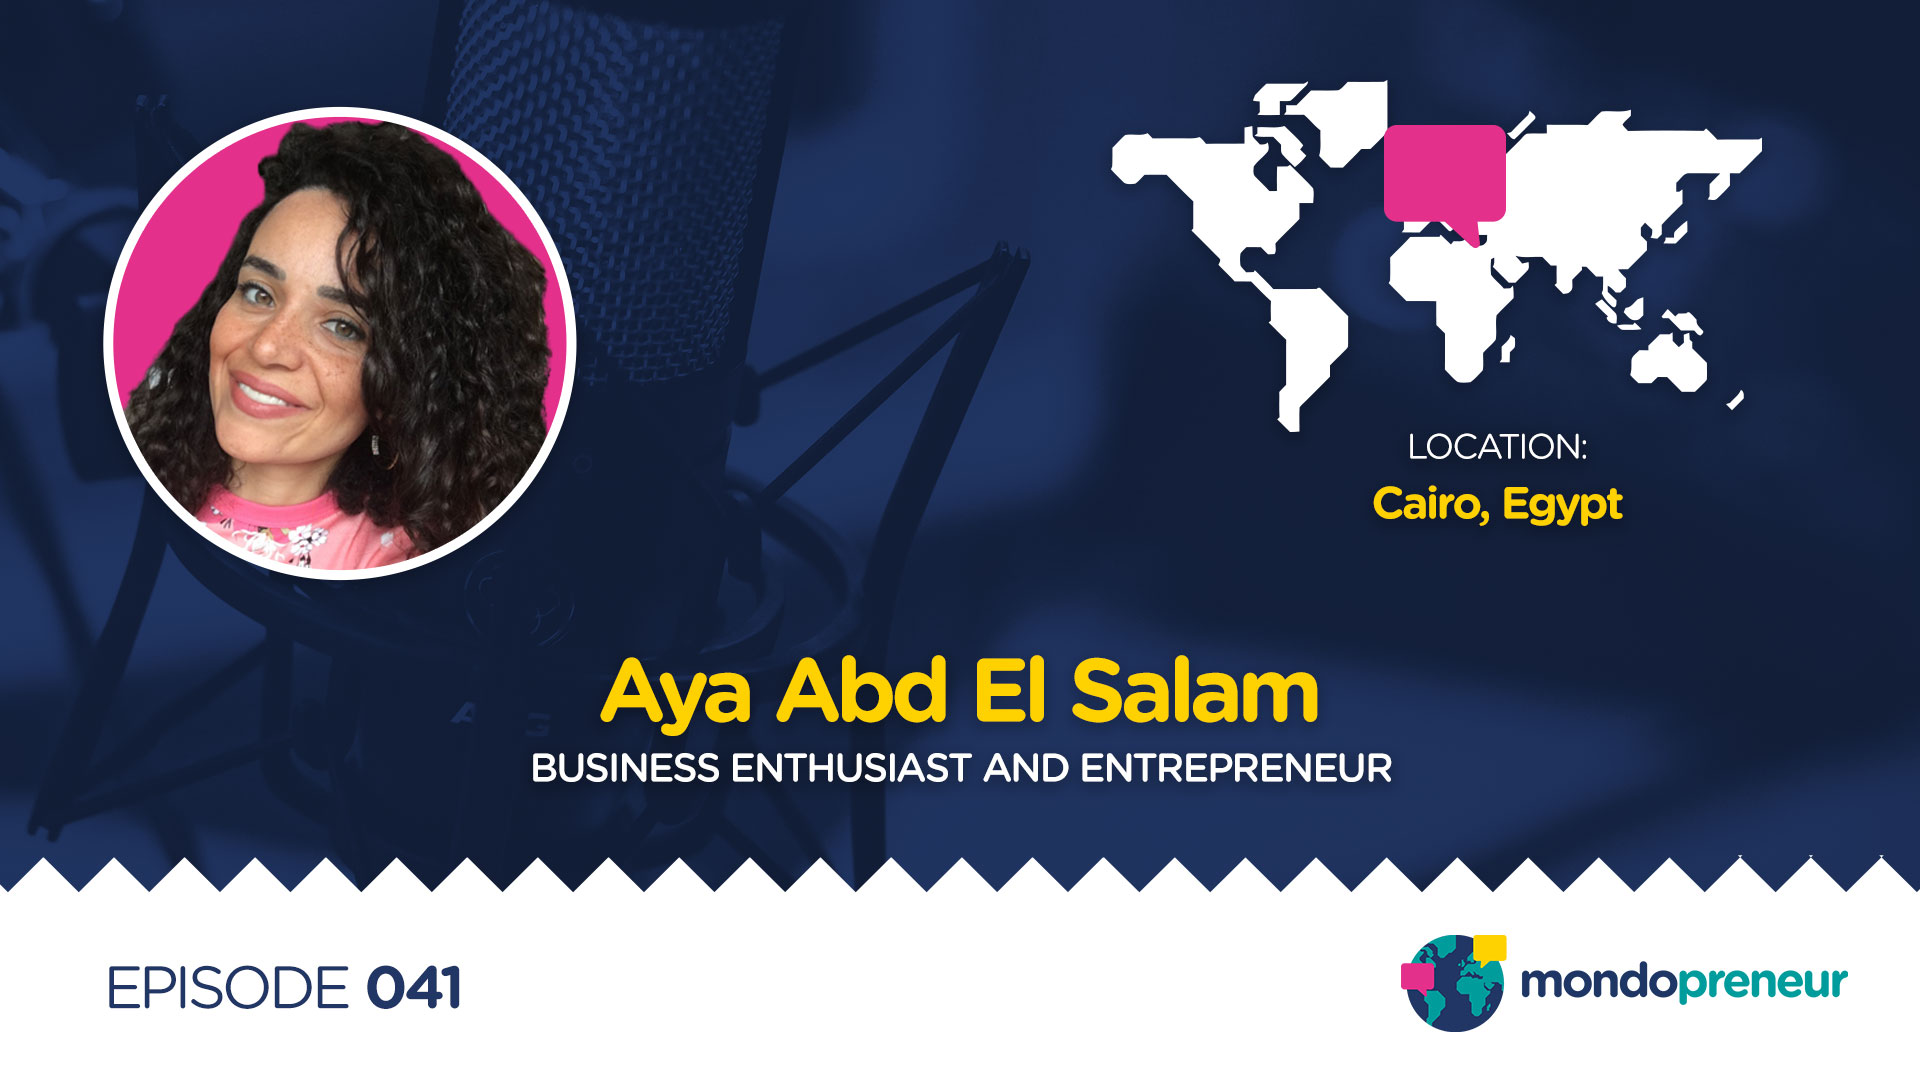 EP041: Aya Abd El Salam, Business Mentor, Business Enthusiast and Entrepreneur from Egypt